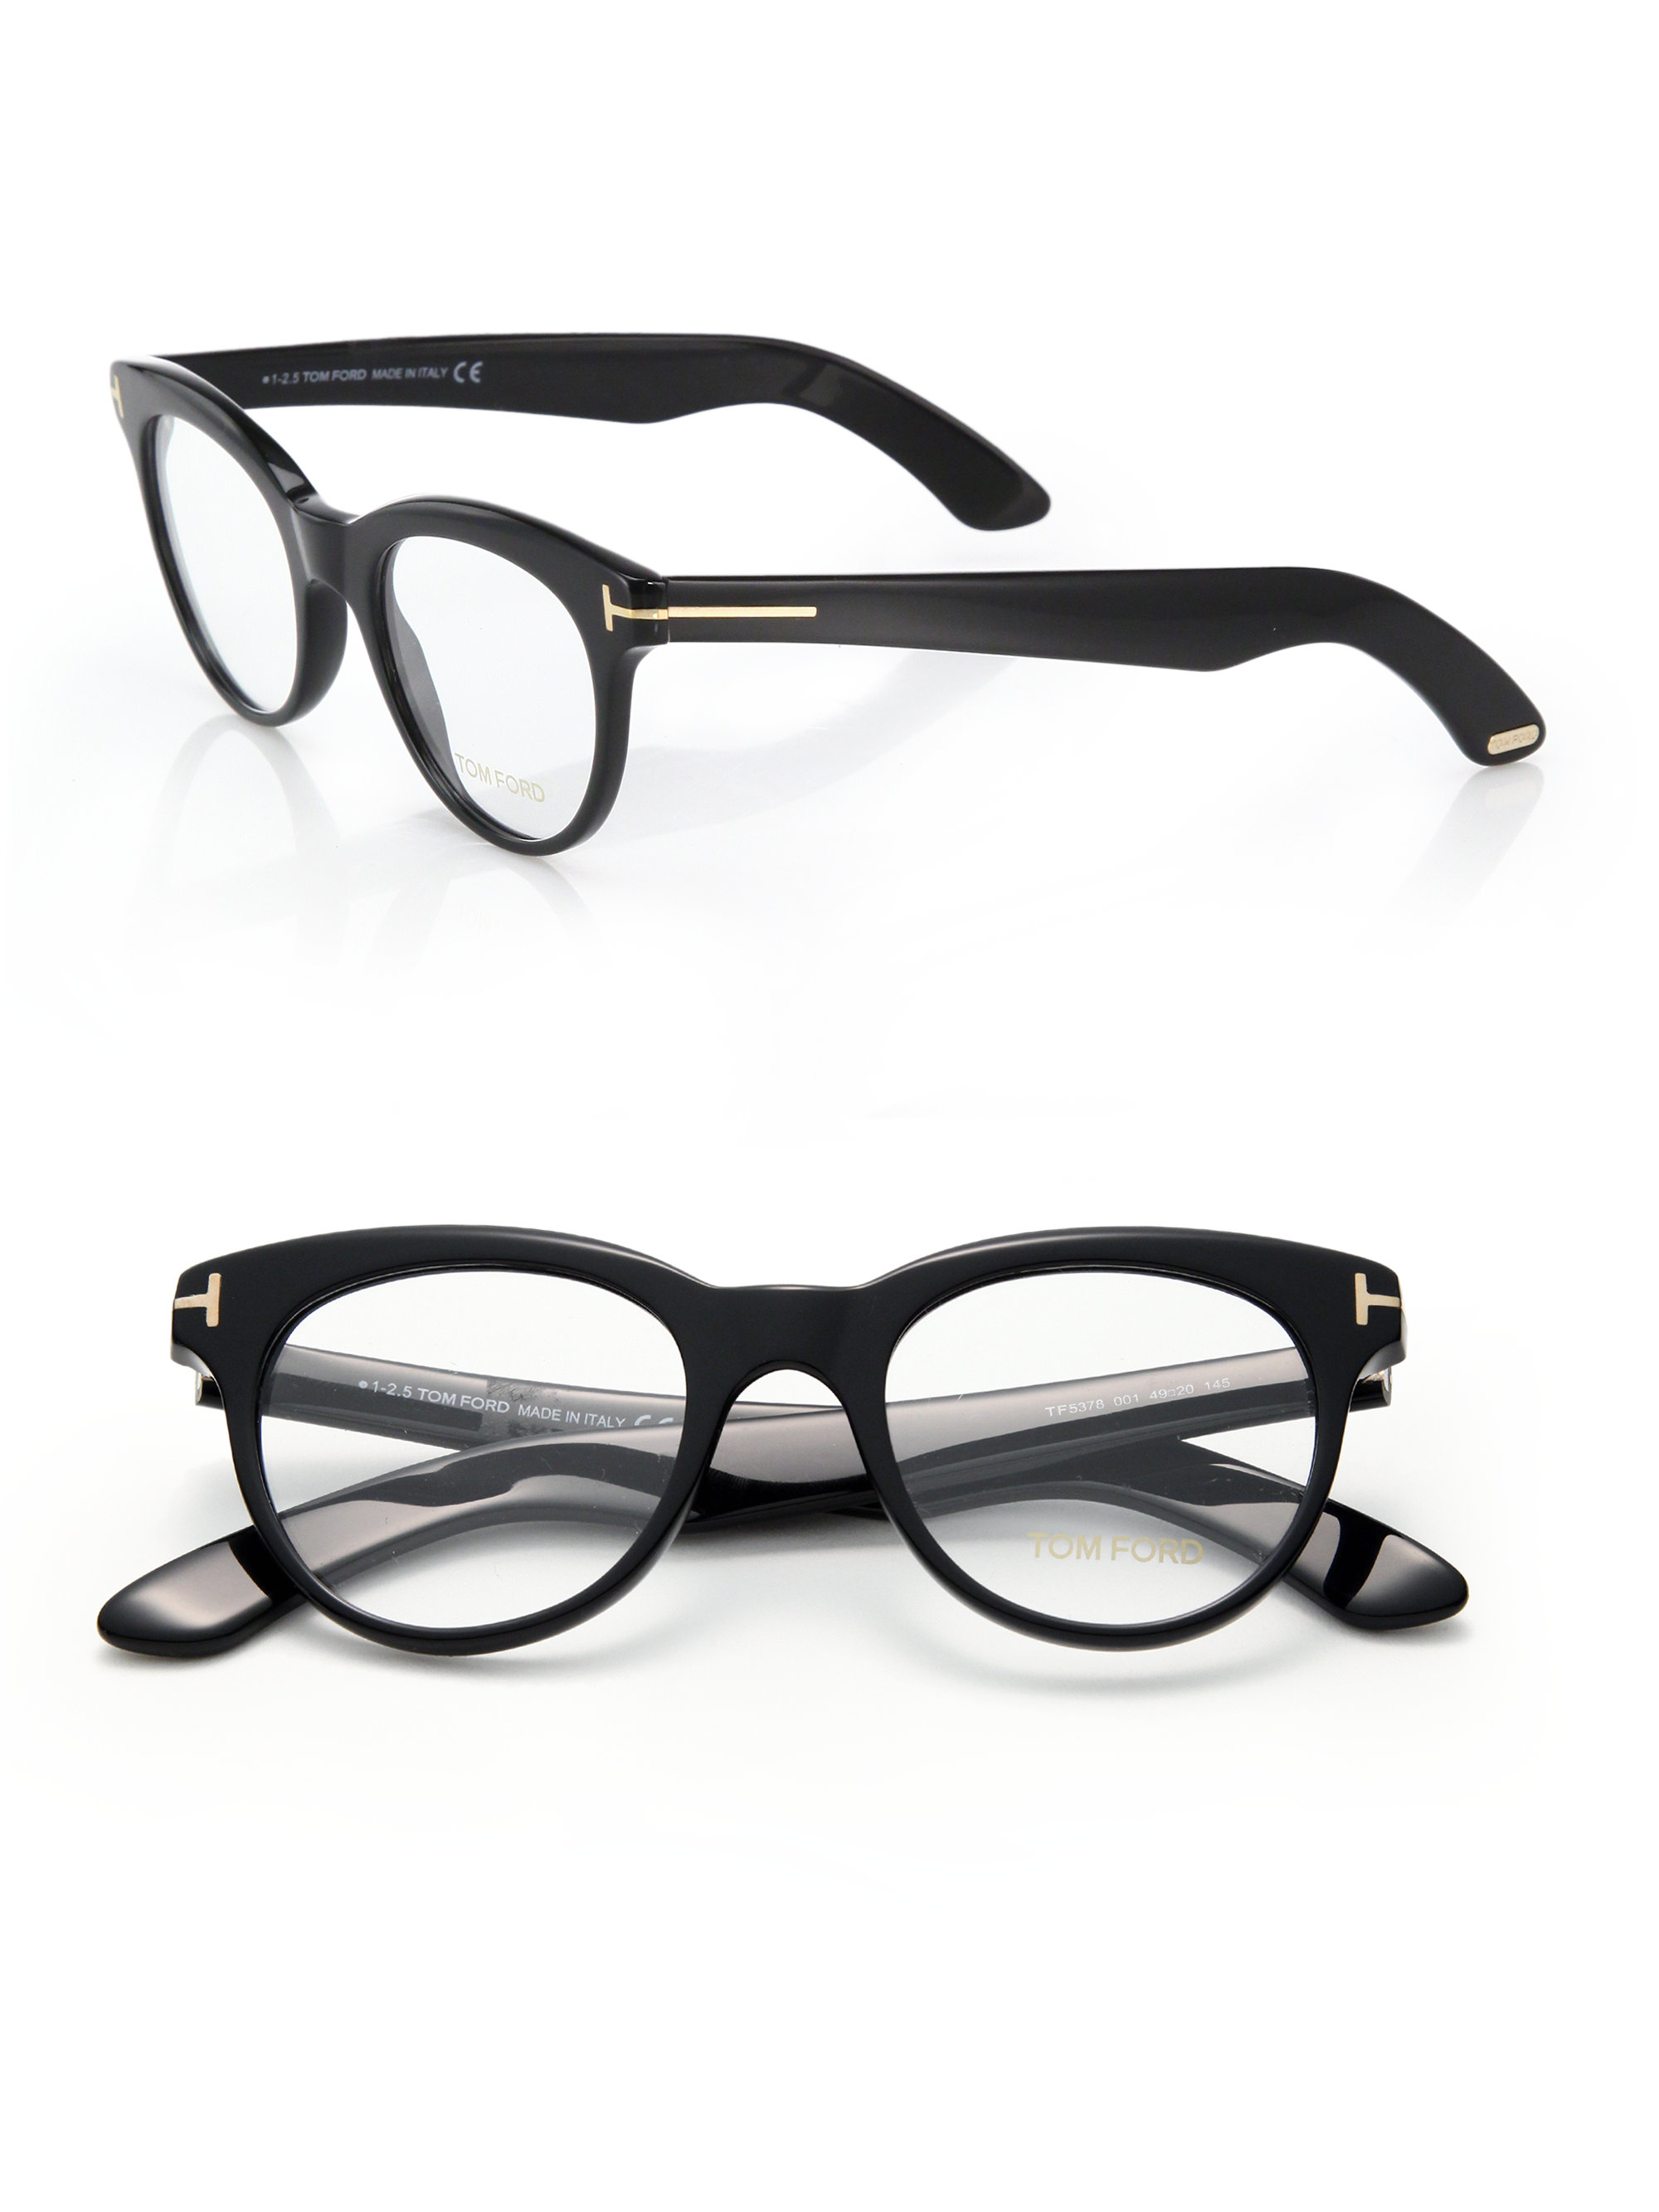 Tom ford 49mm Round Optical Glasses in Black | Lyst